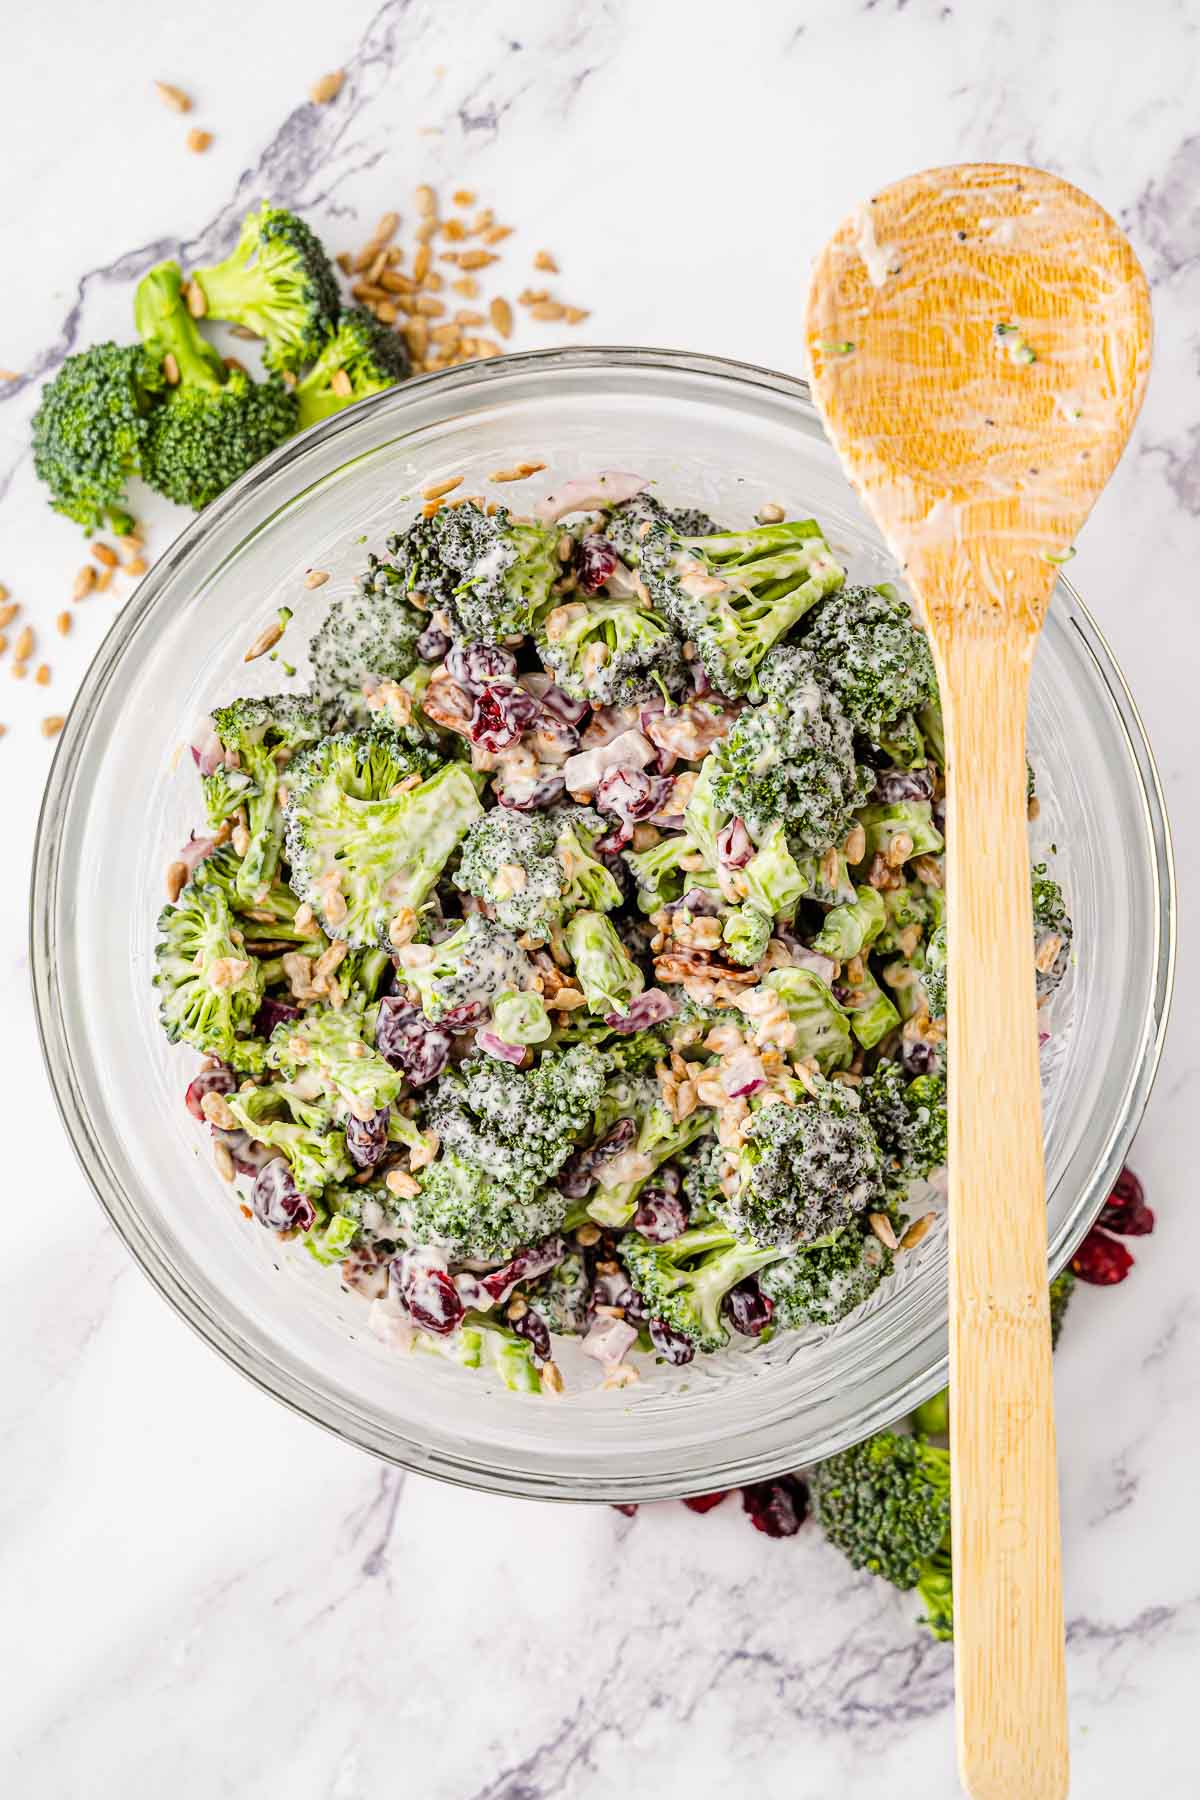 A large glass bowl of broccoli salad ingredients being mixed together by a wooden spoon.